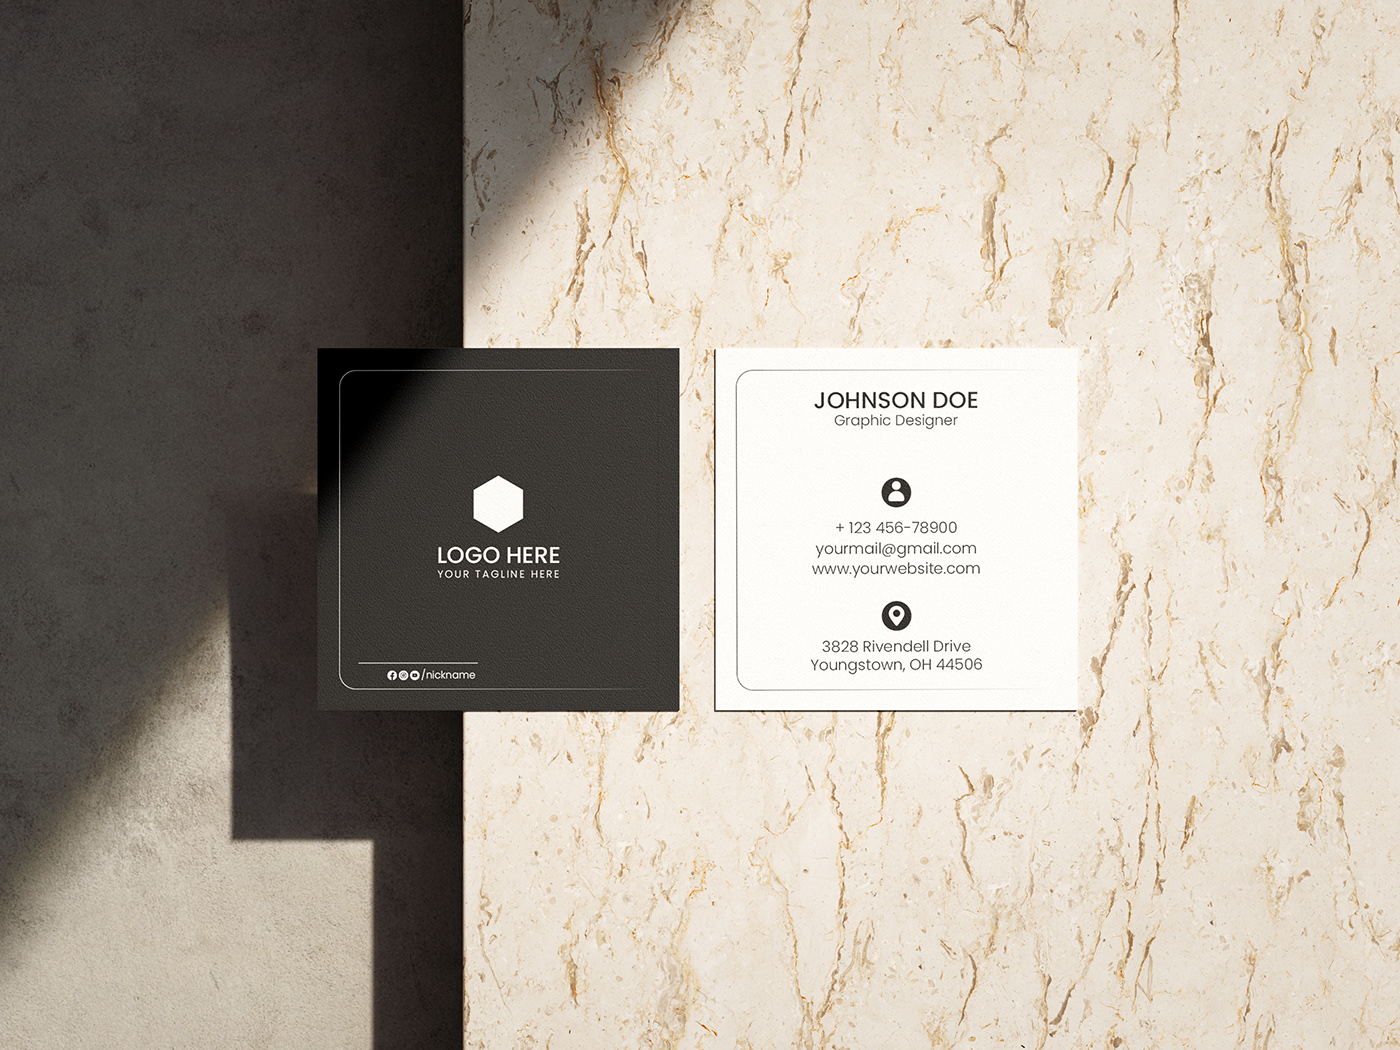 business card Business card design Square Business Card square business cards card design business Graphic Designer design square design graphic